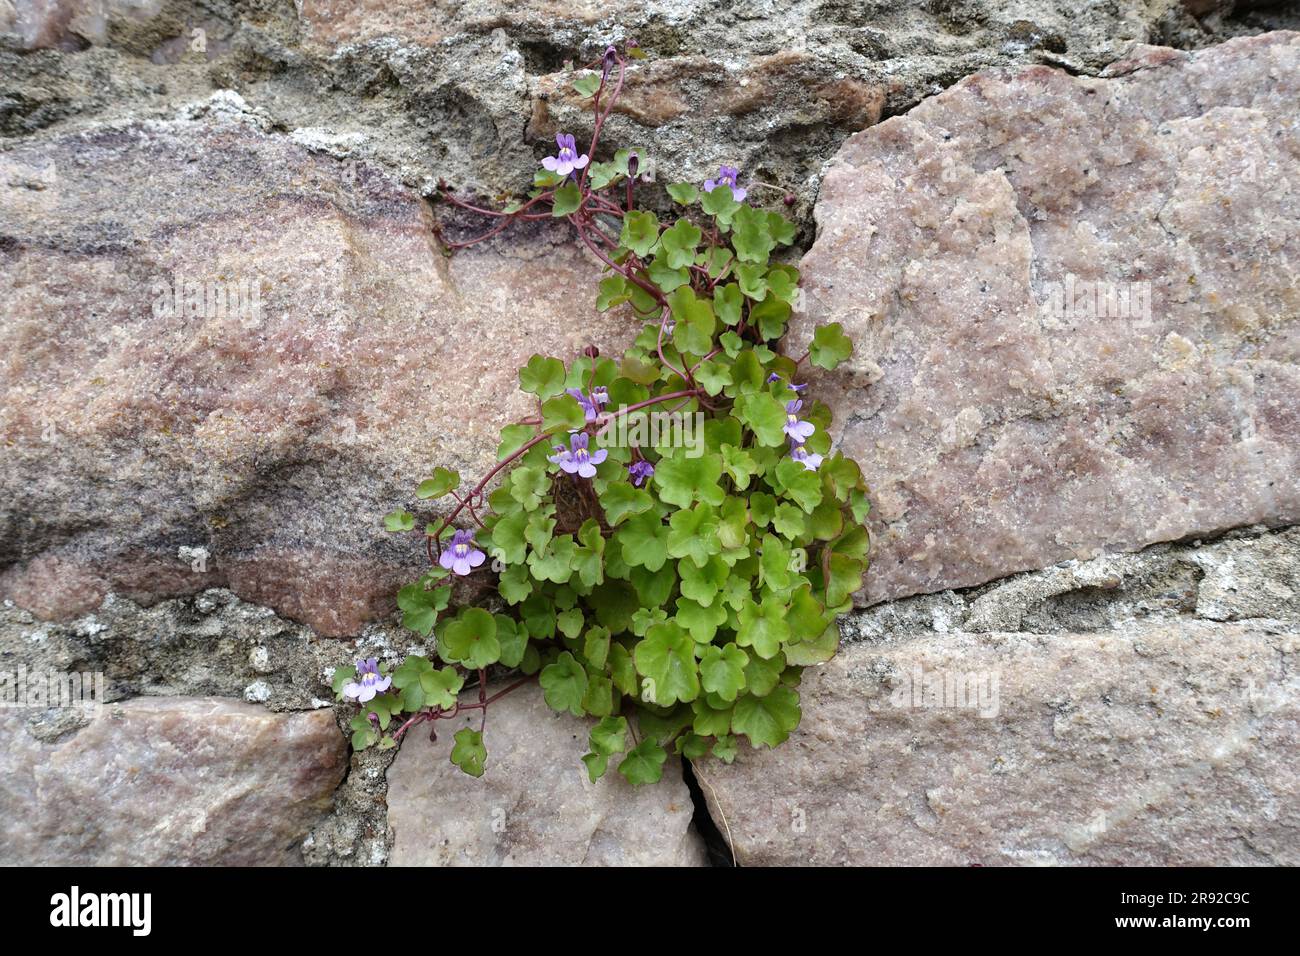 Kenilworth ivy, Ivy-leaved toadflax, Coliseum ivy (Cymbalaria muralis, Linaria muralis), in a crevice in the wall, France, Brittany Stock Photo